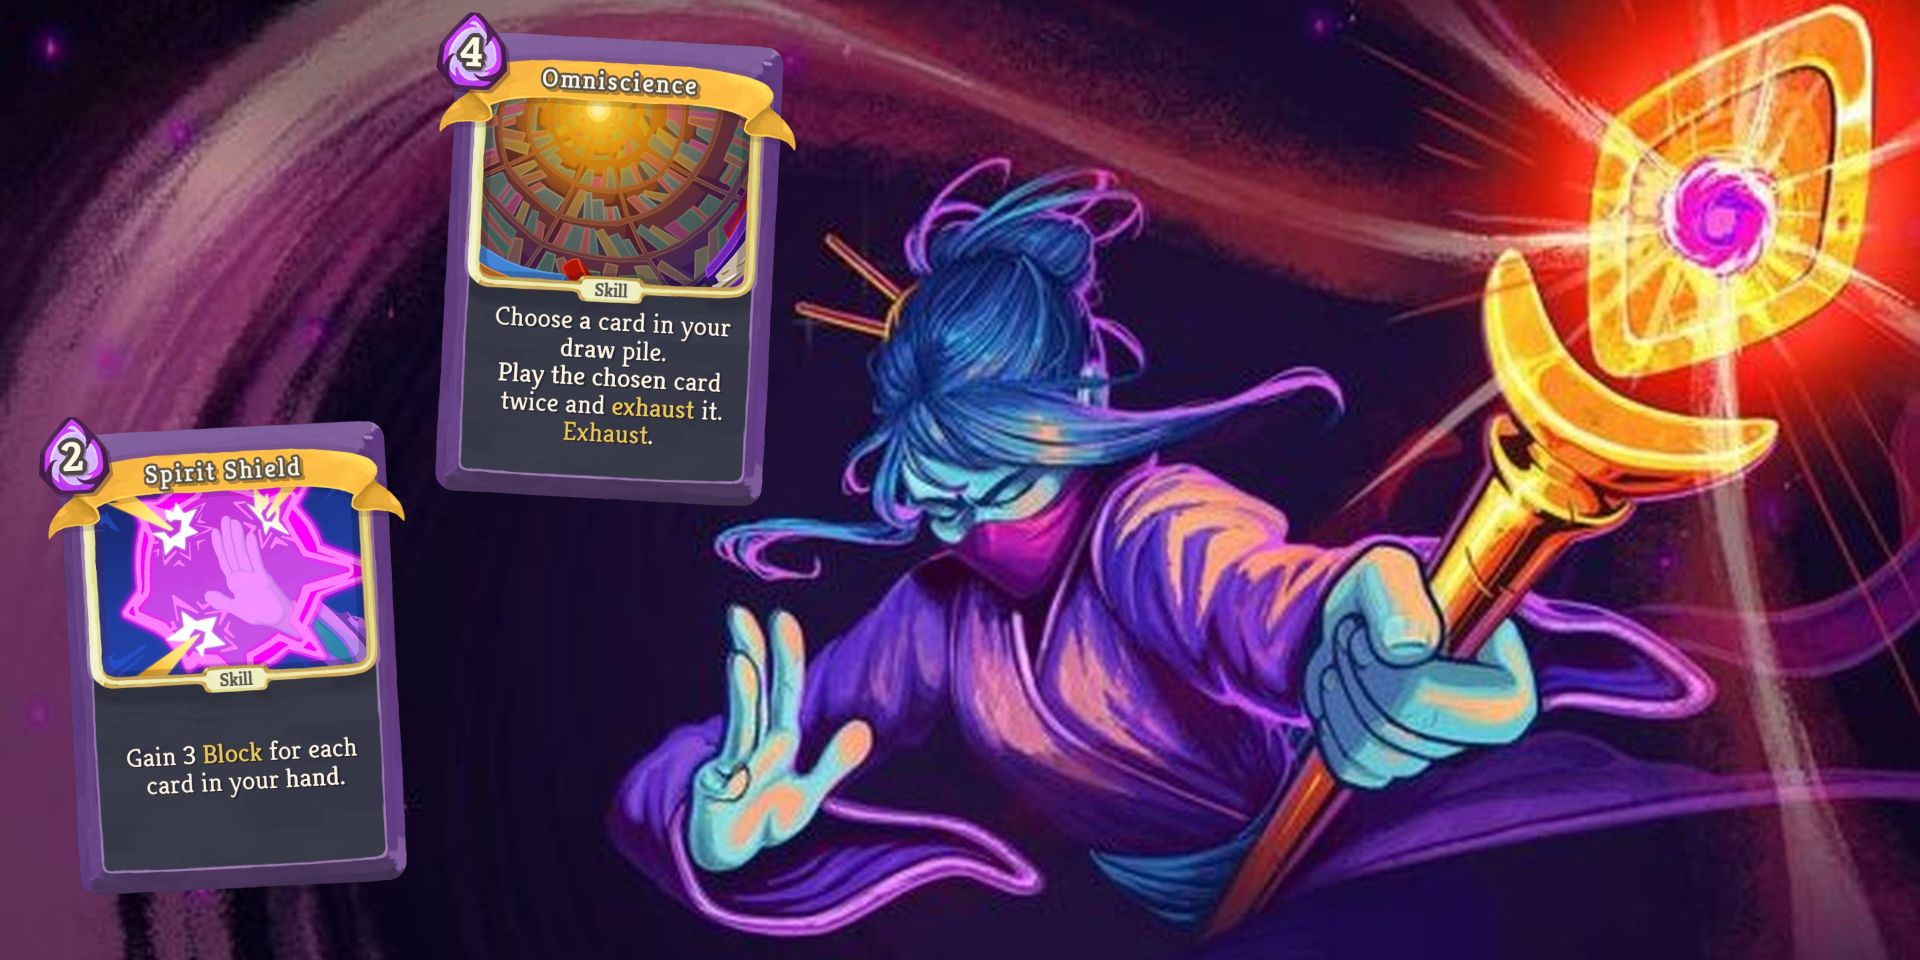 Watcher Title Image, Spirit Shield and Omniscience cards